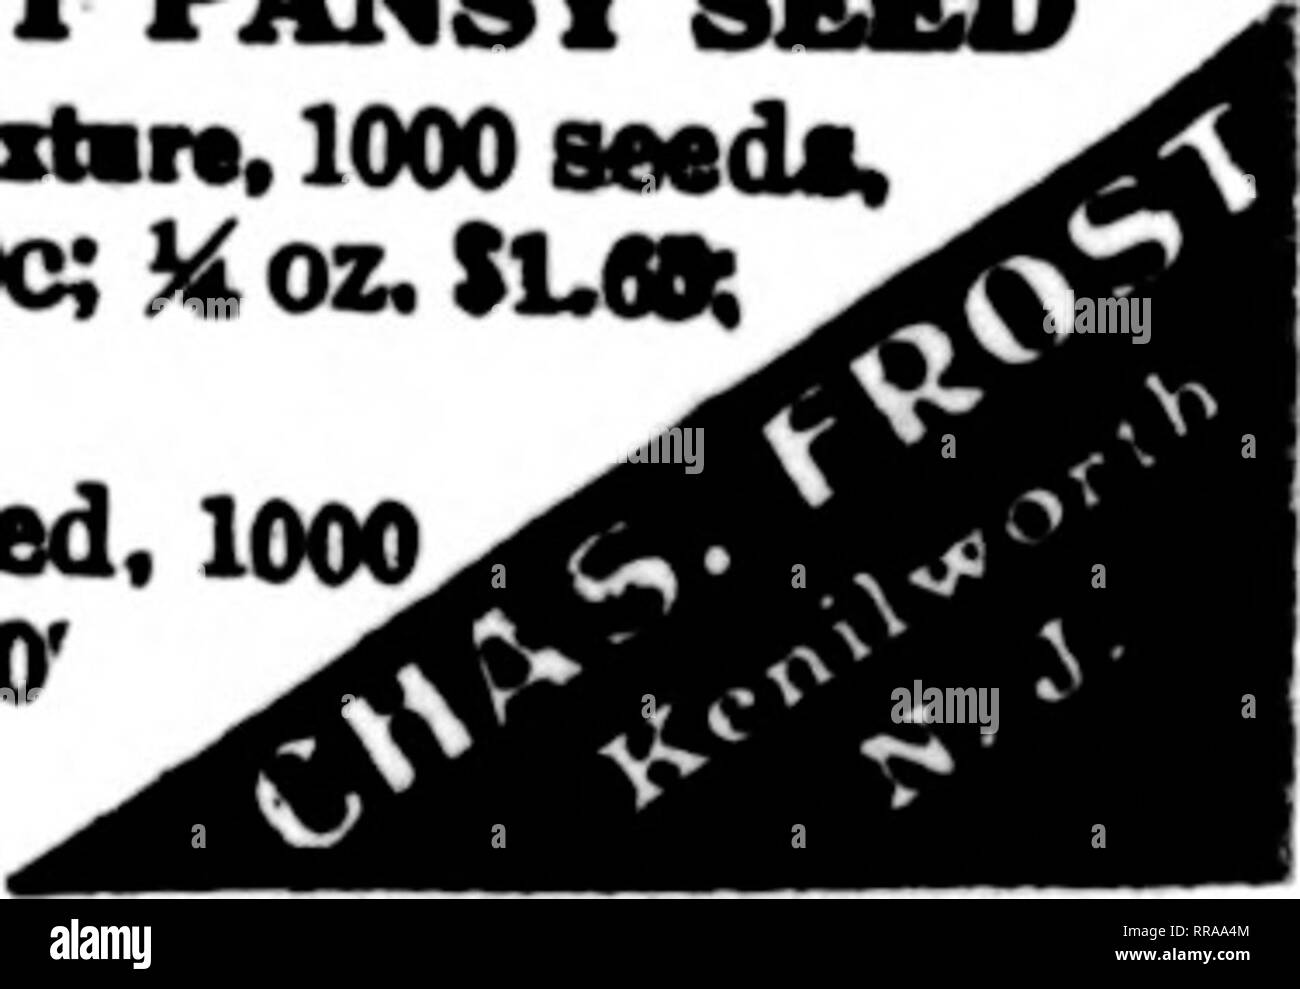 . Florists' review [microform]. Floriculture. VAN ZONNEVELD BROS. &amp; PHILIPPO ESTABLISHBD 1879 SASSENHEIM, - - - HOLLAND GENTLEMEN:— We beg to inform you that our BRANCH OFFICE HAS REMOVED from 18 Broadway to 29 BROADWAY, NEW YORK, N. Y. Ask for our very reasonable prices on DUTCH, FRENCH and JAPANESE bulbs. Be sure to get the most for your money. AGE AND REPUTATION ARE TWO FACTORS WORTH CONSIDERATION Darwin Tulip Specialists Let us haTO your list; we will trive you the right rarieties to cataloRue at the right price. We are growers of the finest and largest collection in the world. Also or Stock Photo